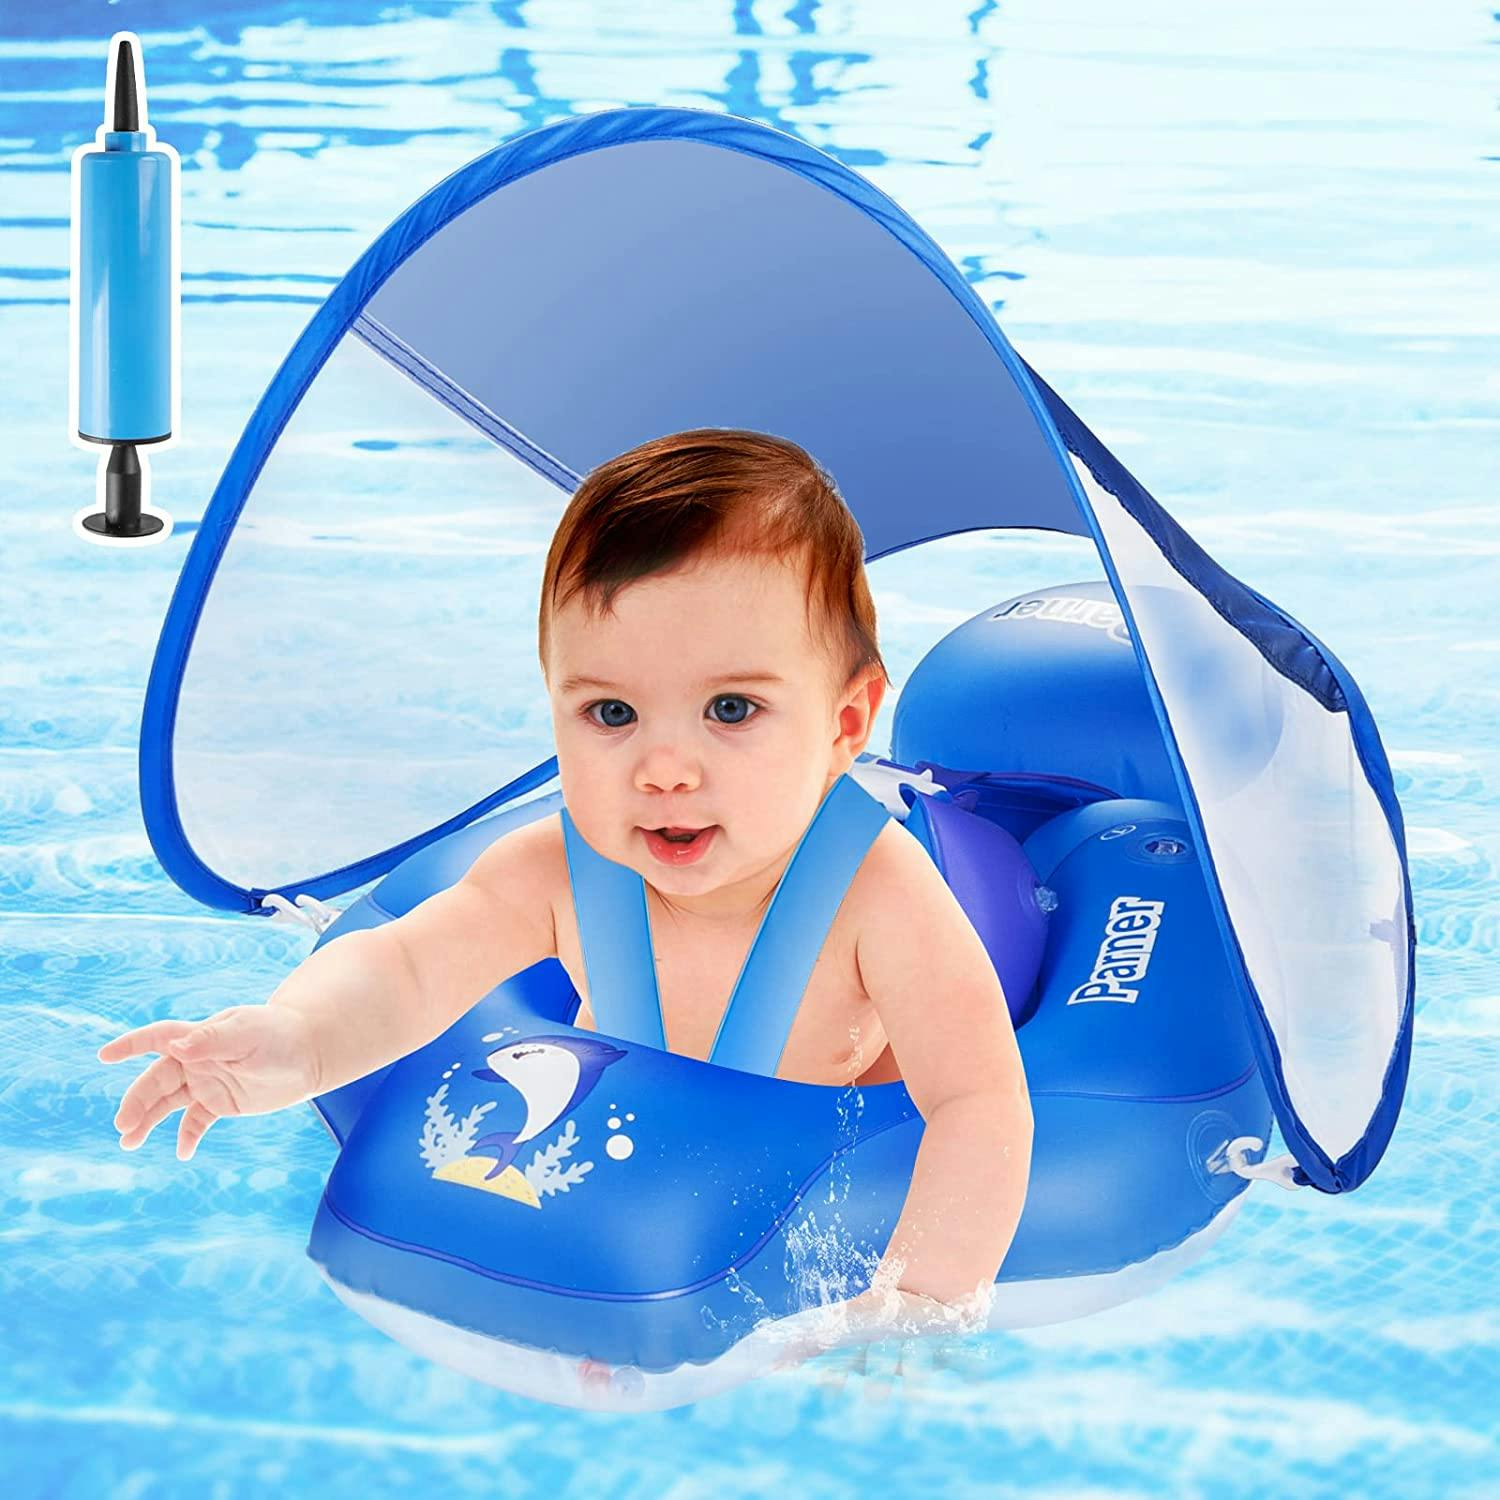 The best baby swim seat for water fun in the sun